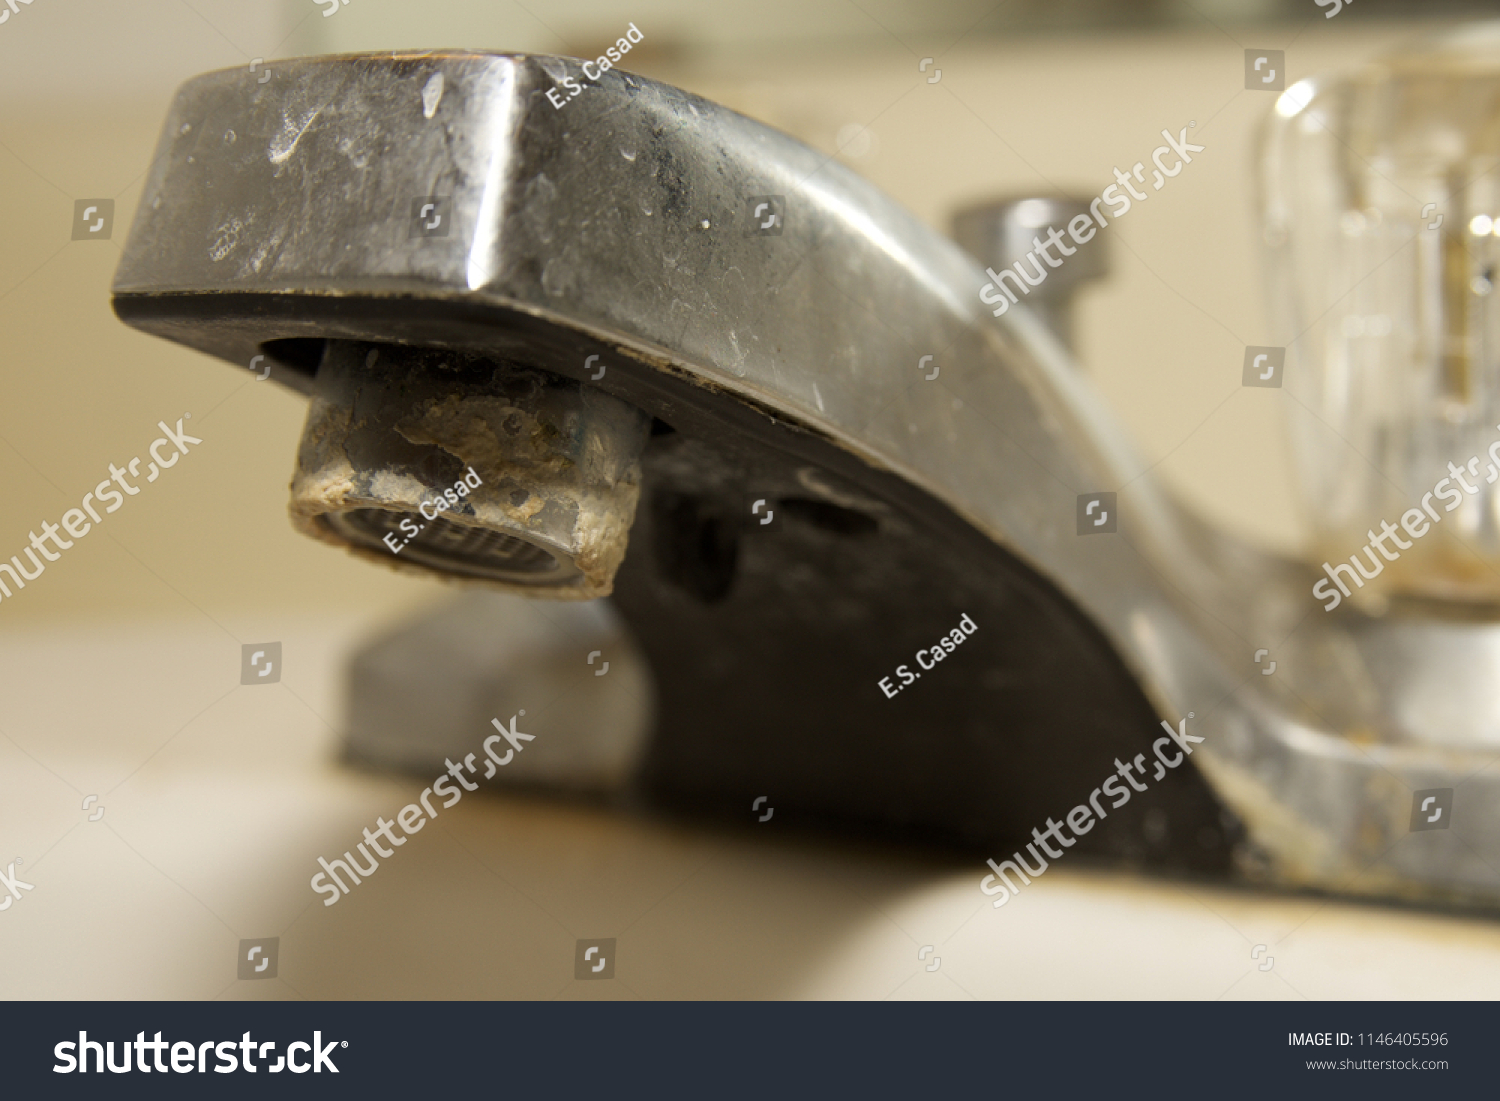 Minerals from hard water on bathroom sink faucet. #1146405596